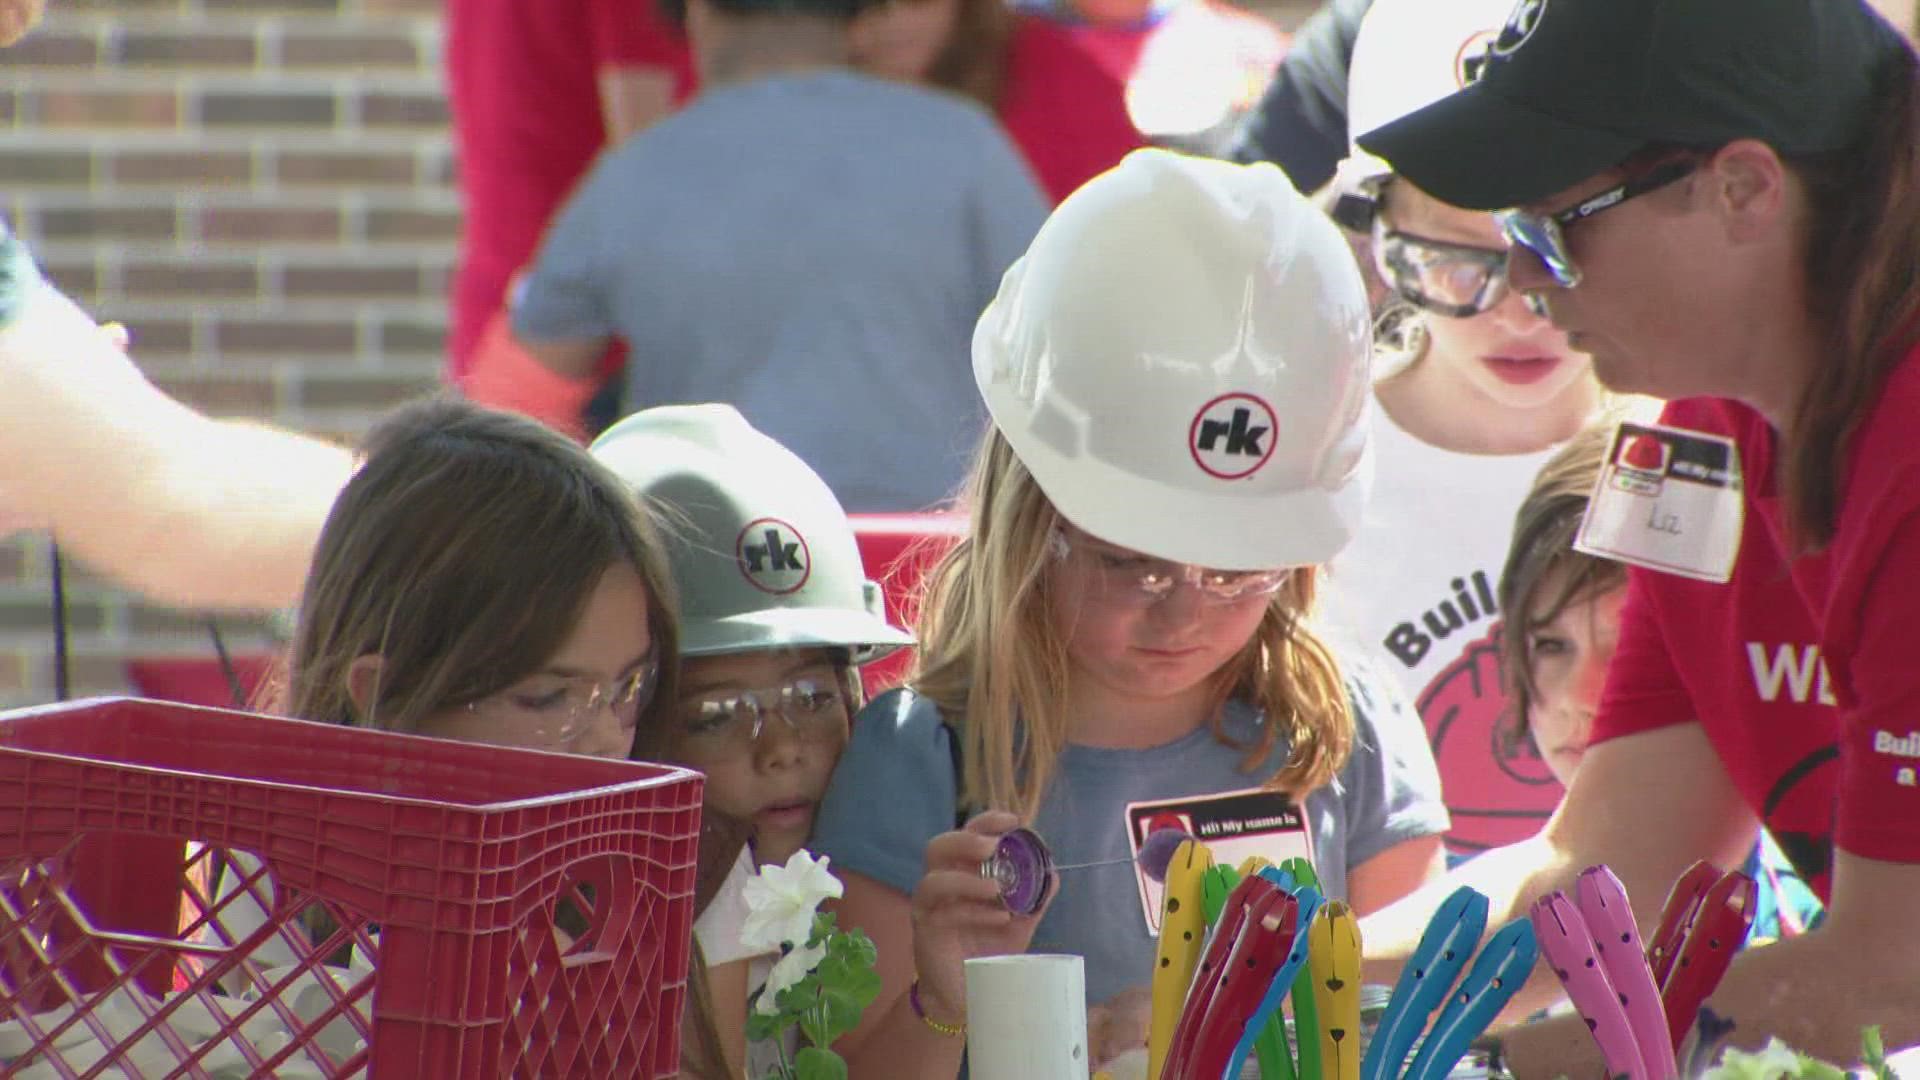 The purpose of "Build Like a Girl" is to introduce young girls to the construction industry and potential careers.